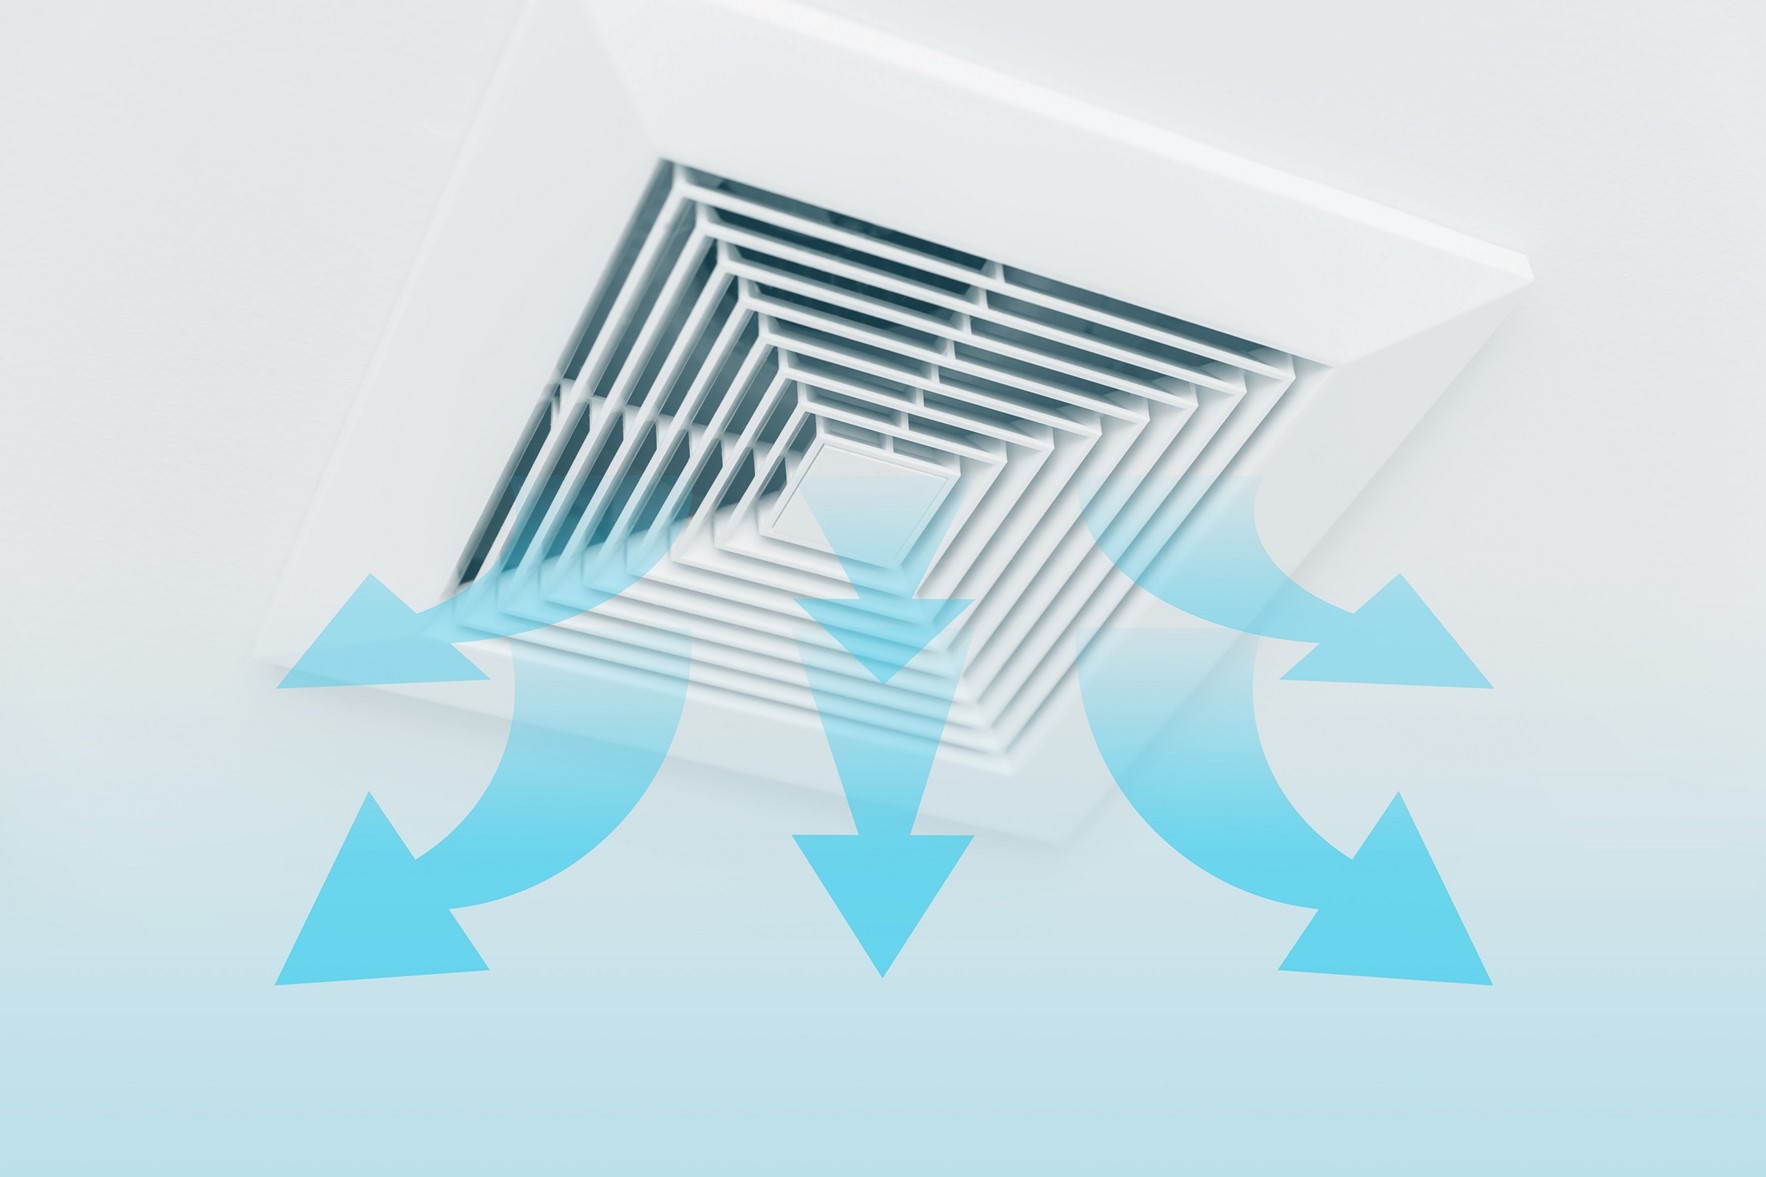 Conceptual Image of Blue Arrows Coming Out of a Ceiling Air Vent to Illustrate Air Flow